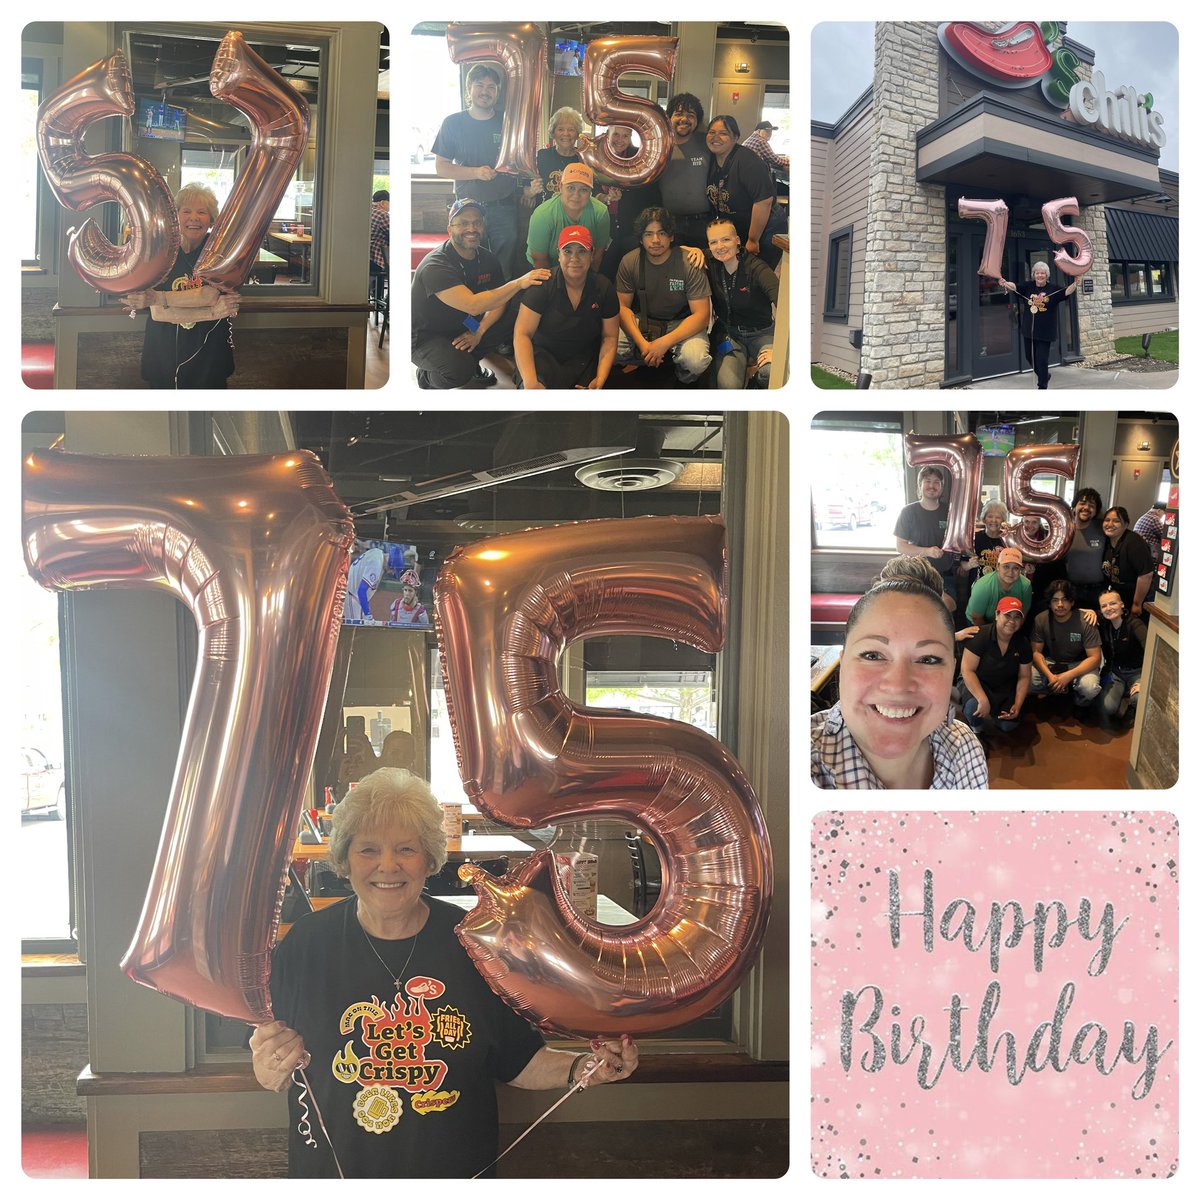 Happy 75th birthday to Julie at #ChilisCleburne! She has worked for this Chilis for 12 years and is THE HOST WITH THE MOST! She is such an amazing team member and the face of Cleburne! She knows everyone in town! #ChilisLove #MakingPeopleFeelSpecial